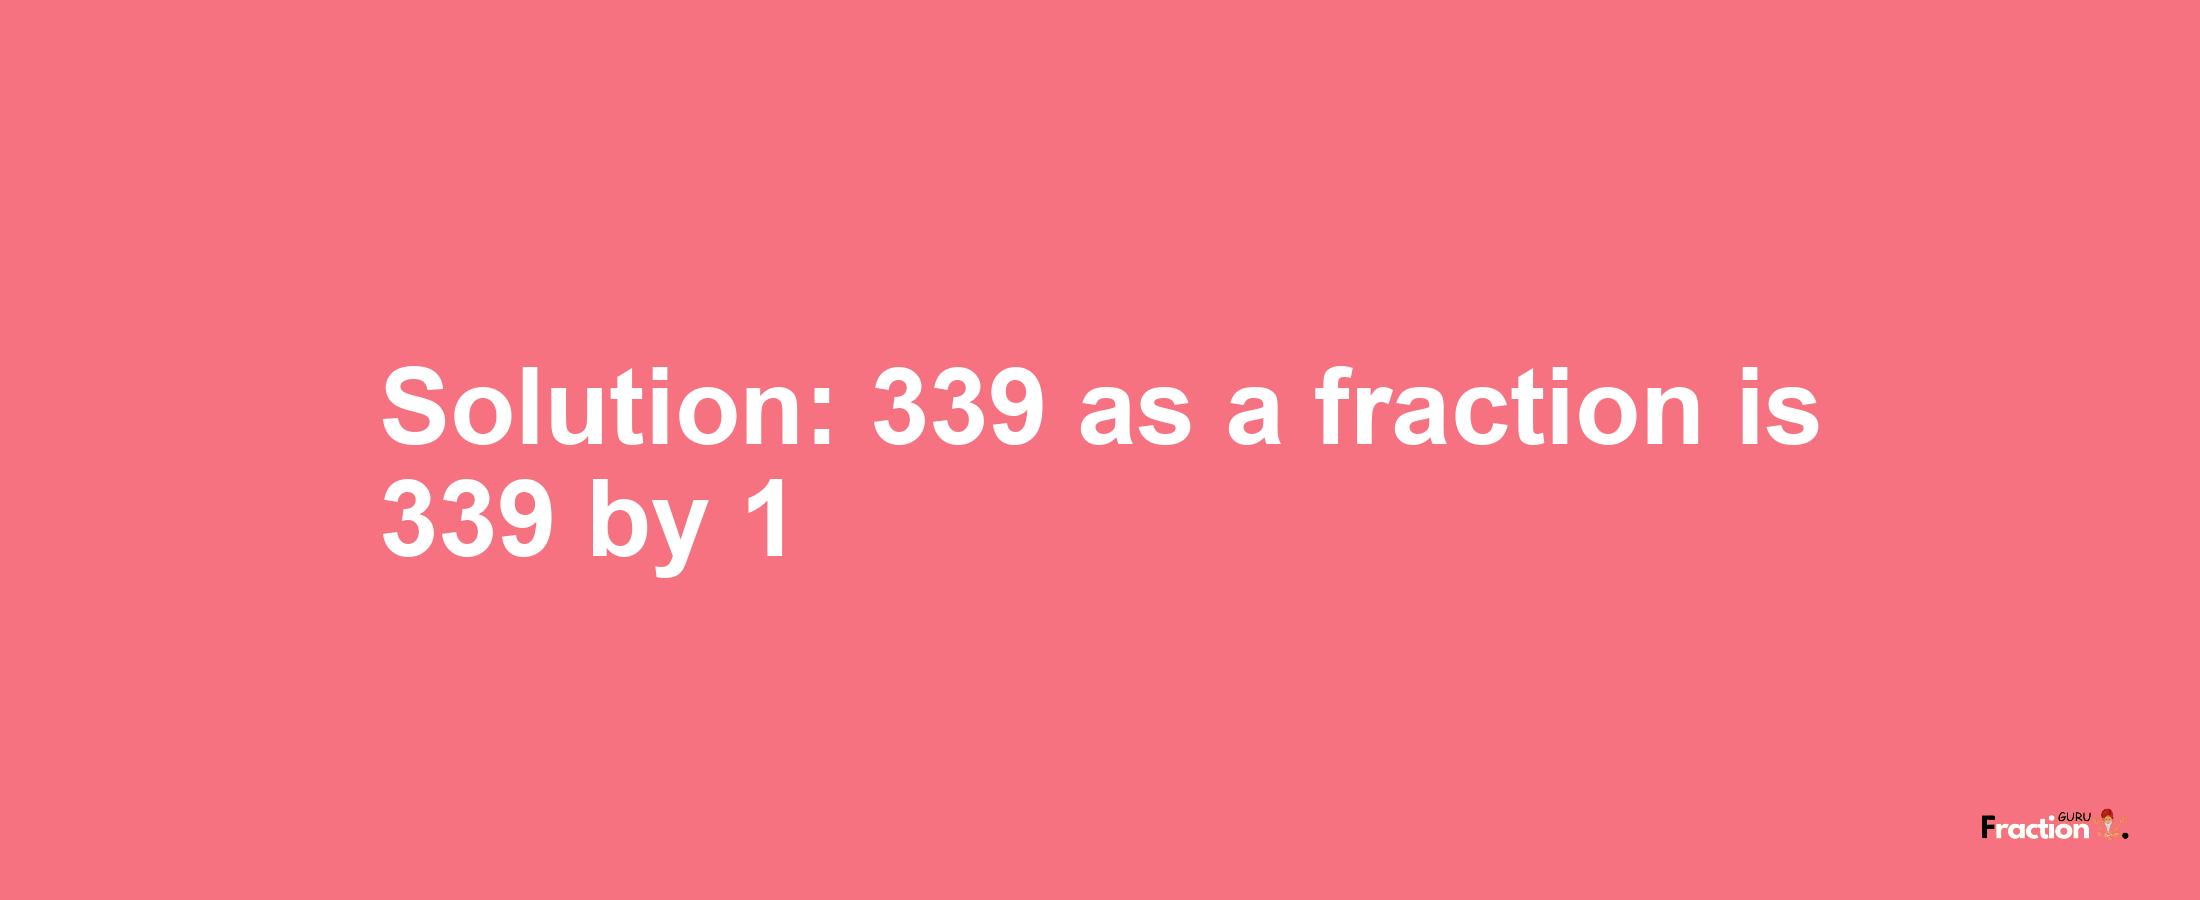 Solution:339 as a fraction is 339/1